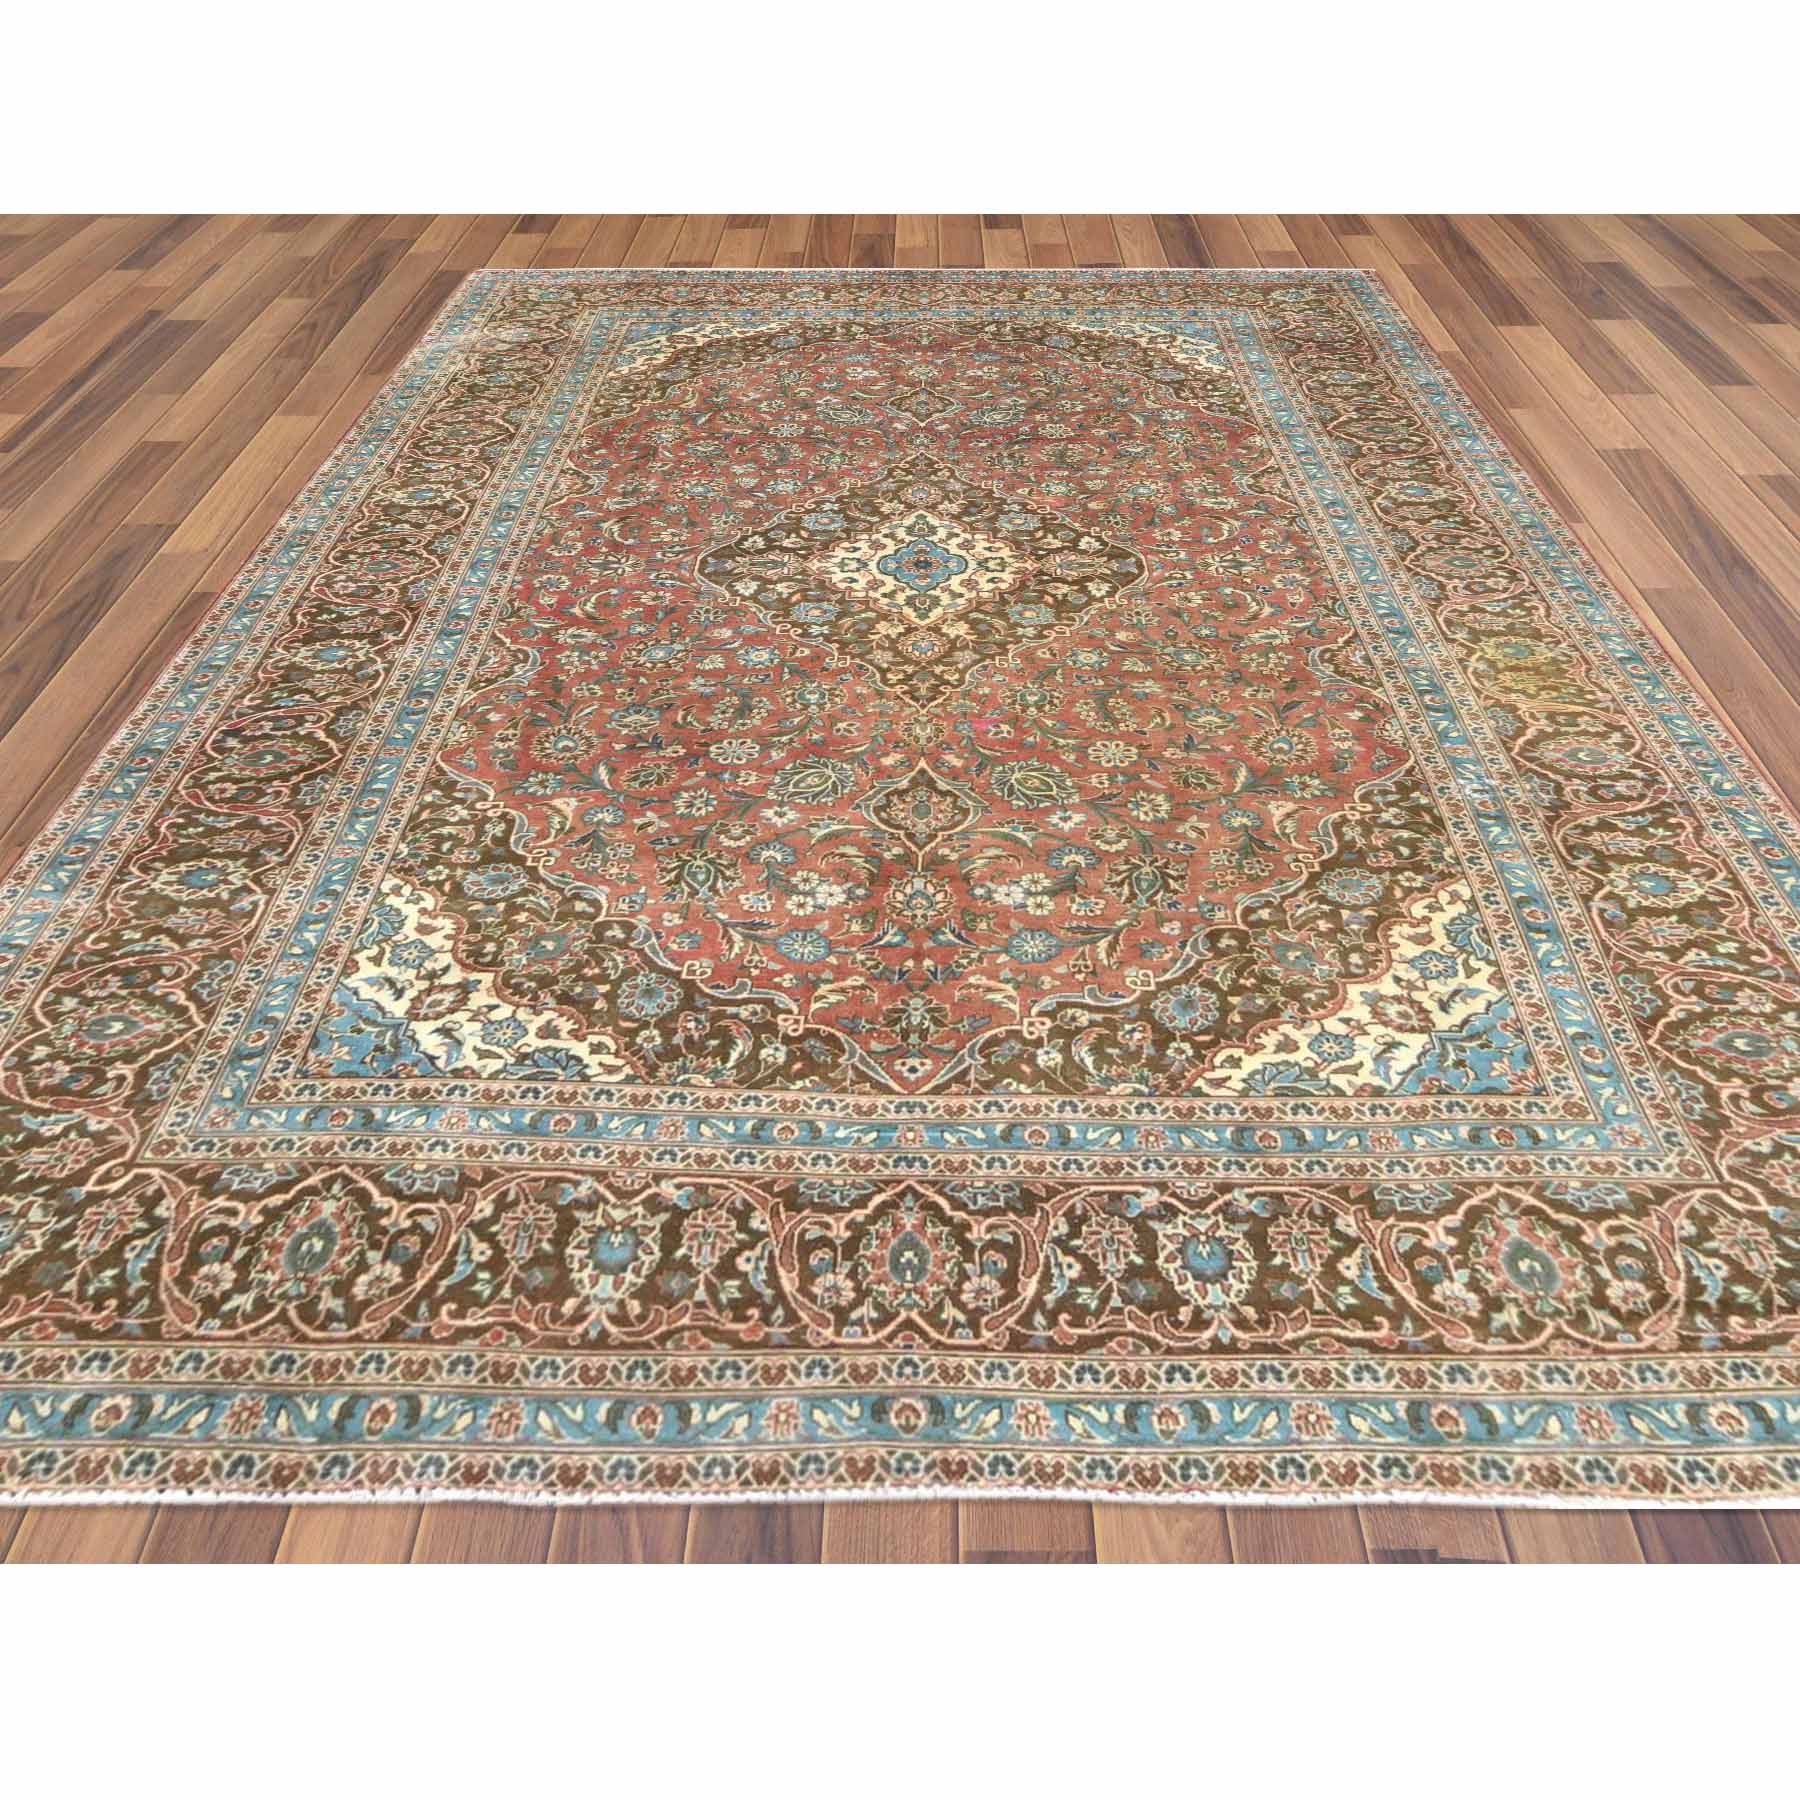 Overdyed-Vintage-Hand-Knotted-Rug-307585